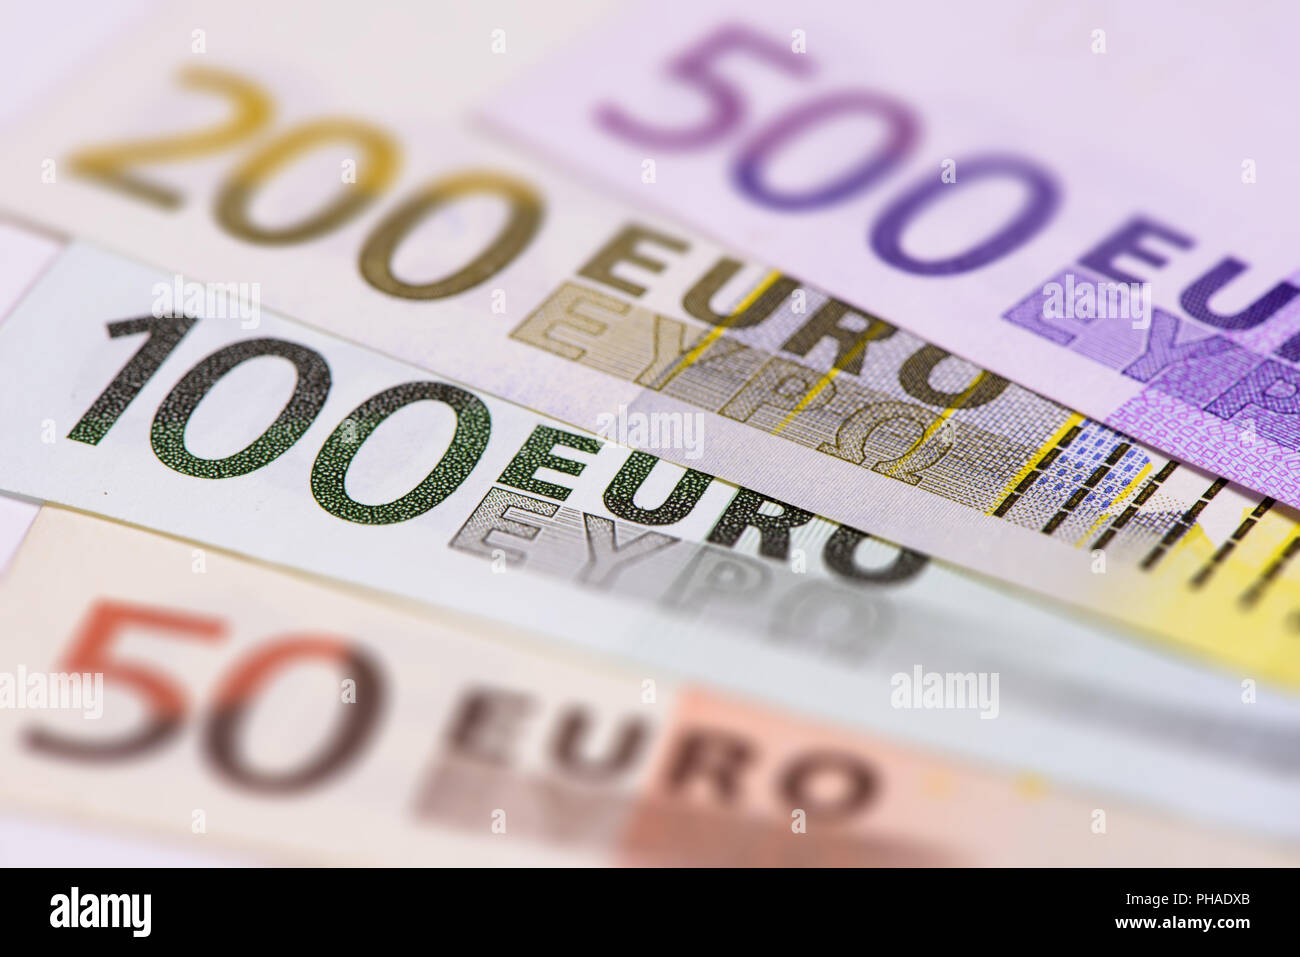 many banknotes of euro currency Stock Photo